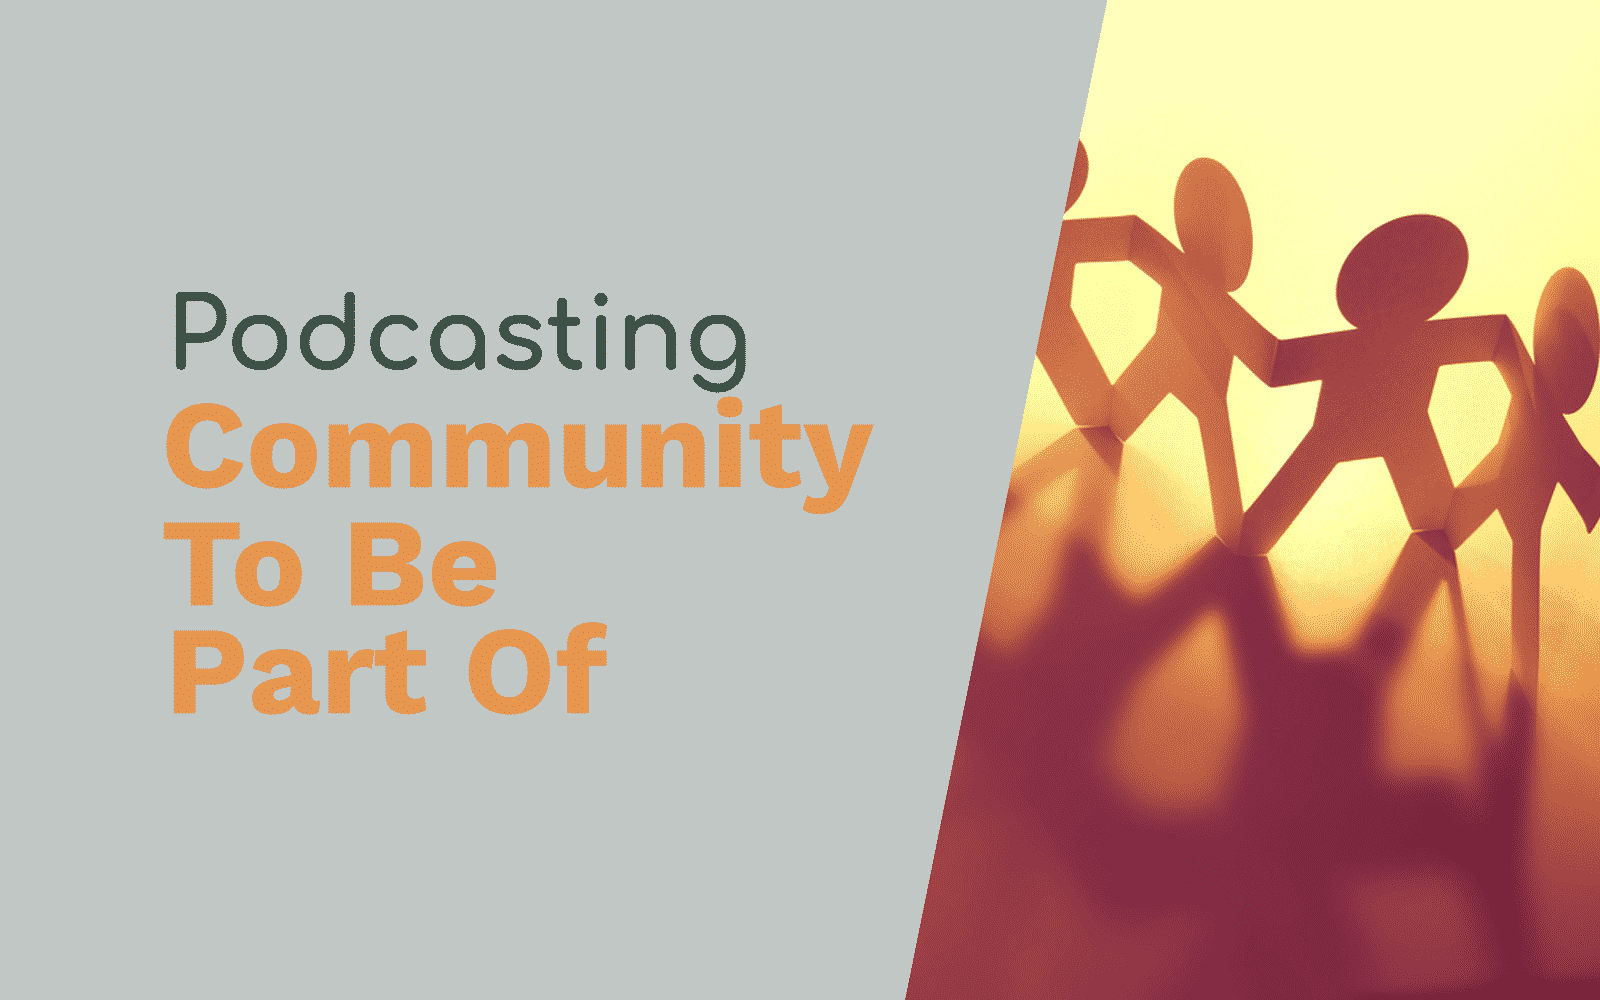 Podcast Communities You Should Be A Part Of Podcasting podcast communities Music Radio Creative